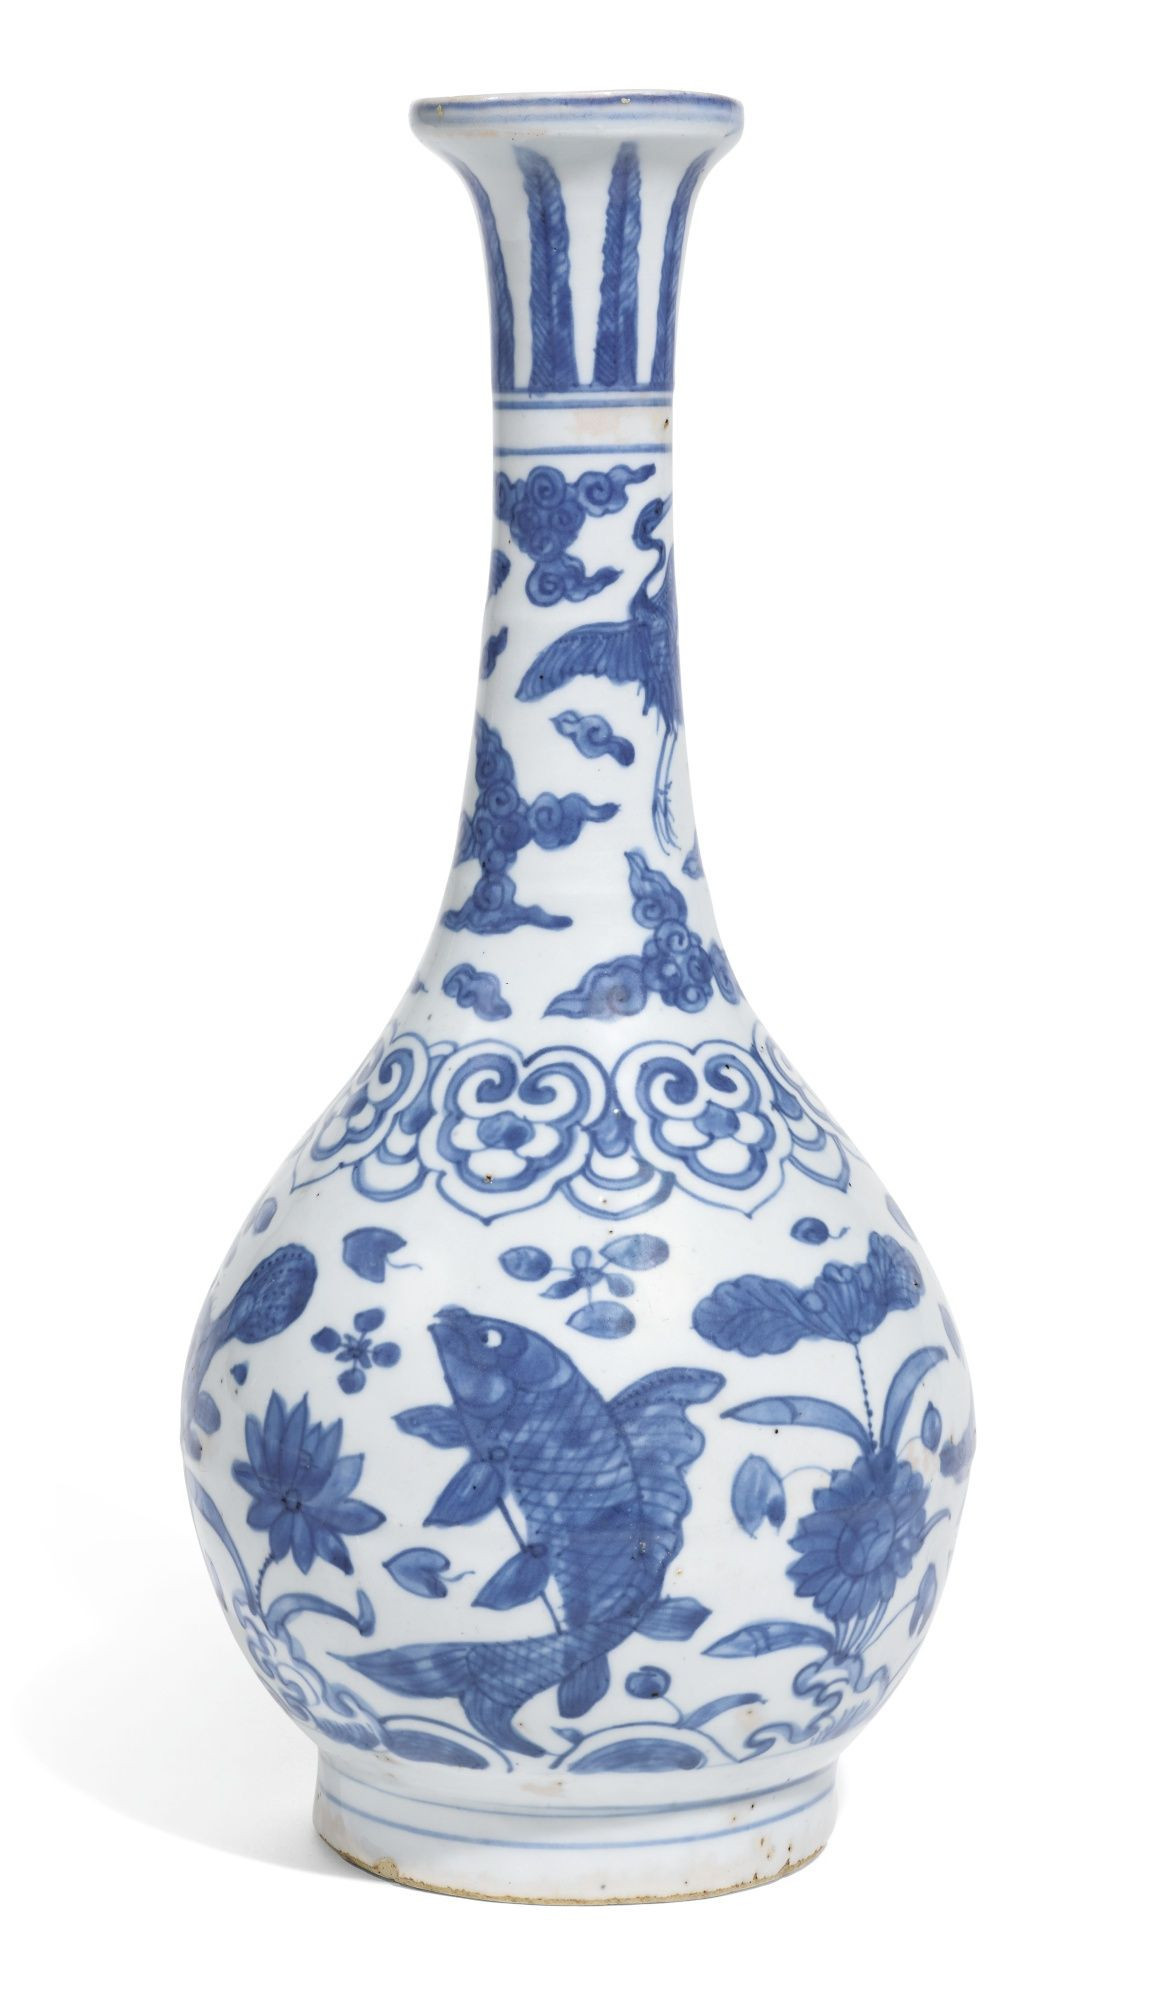 27 attractive Qing Dynasty Vase 2023 free download qing dynasty vase of stock of blue and white vases vases artificial plants collection intended for blue and white vases gallery a blue and white bottle vase ming dynasty jiajing wanli period